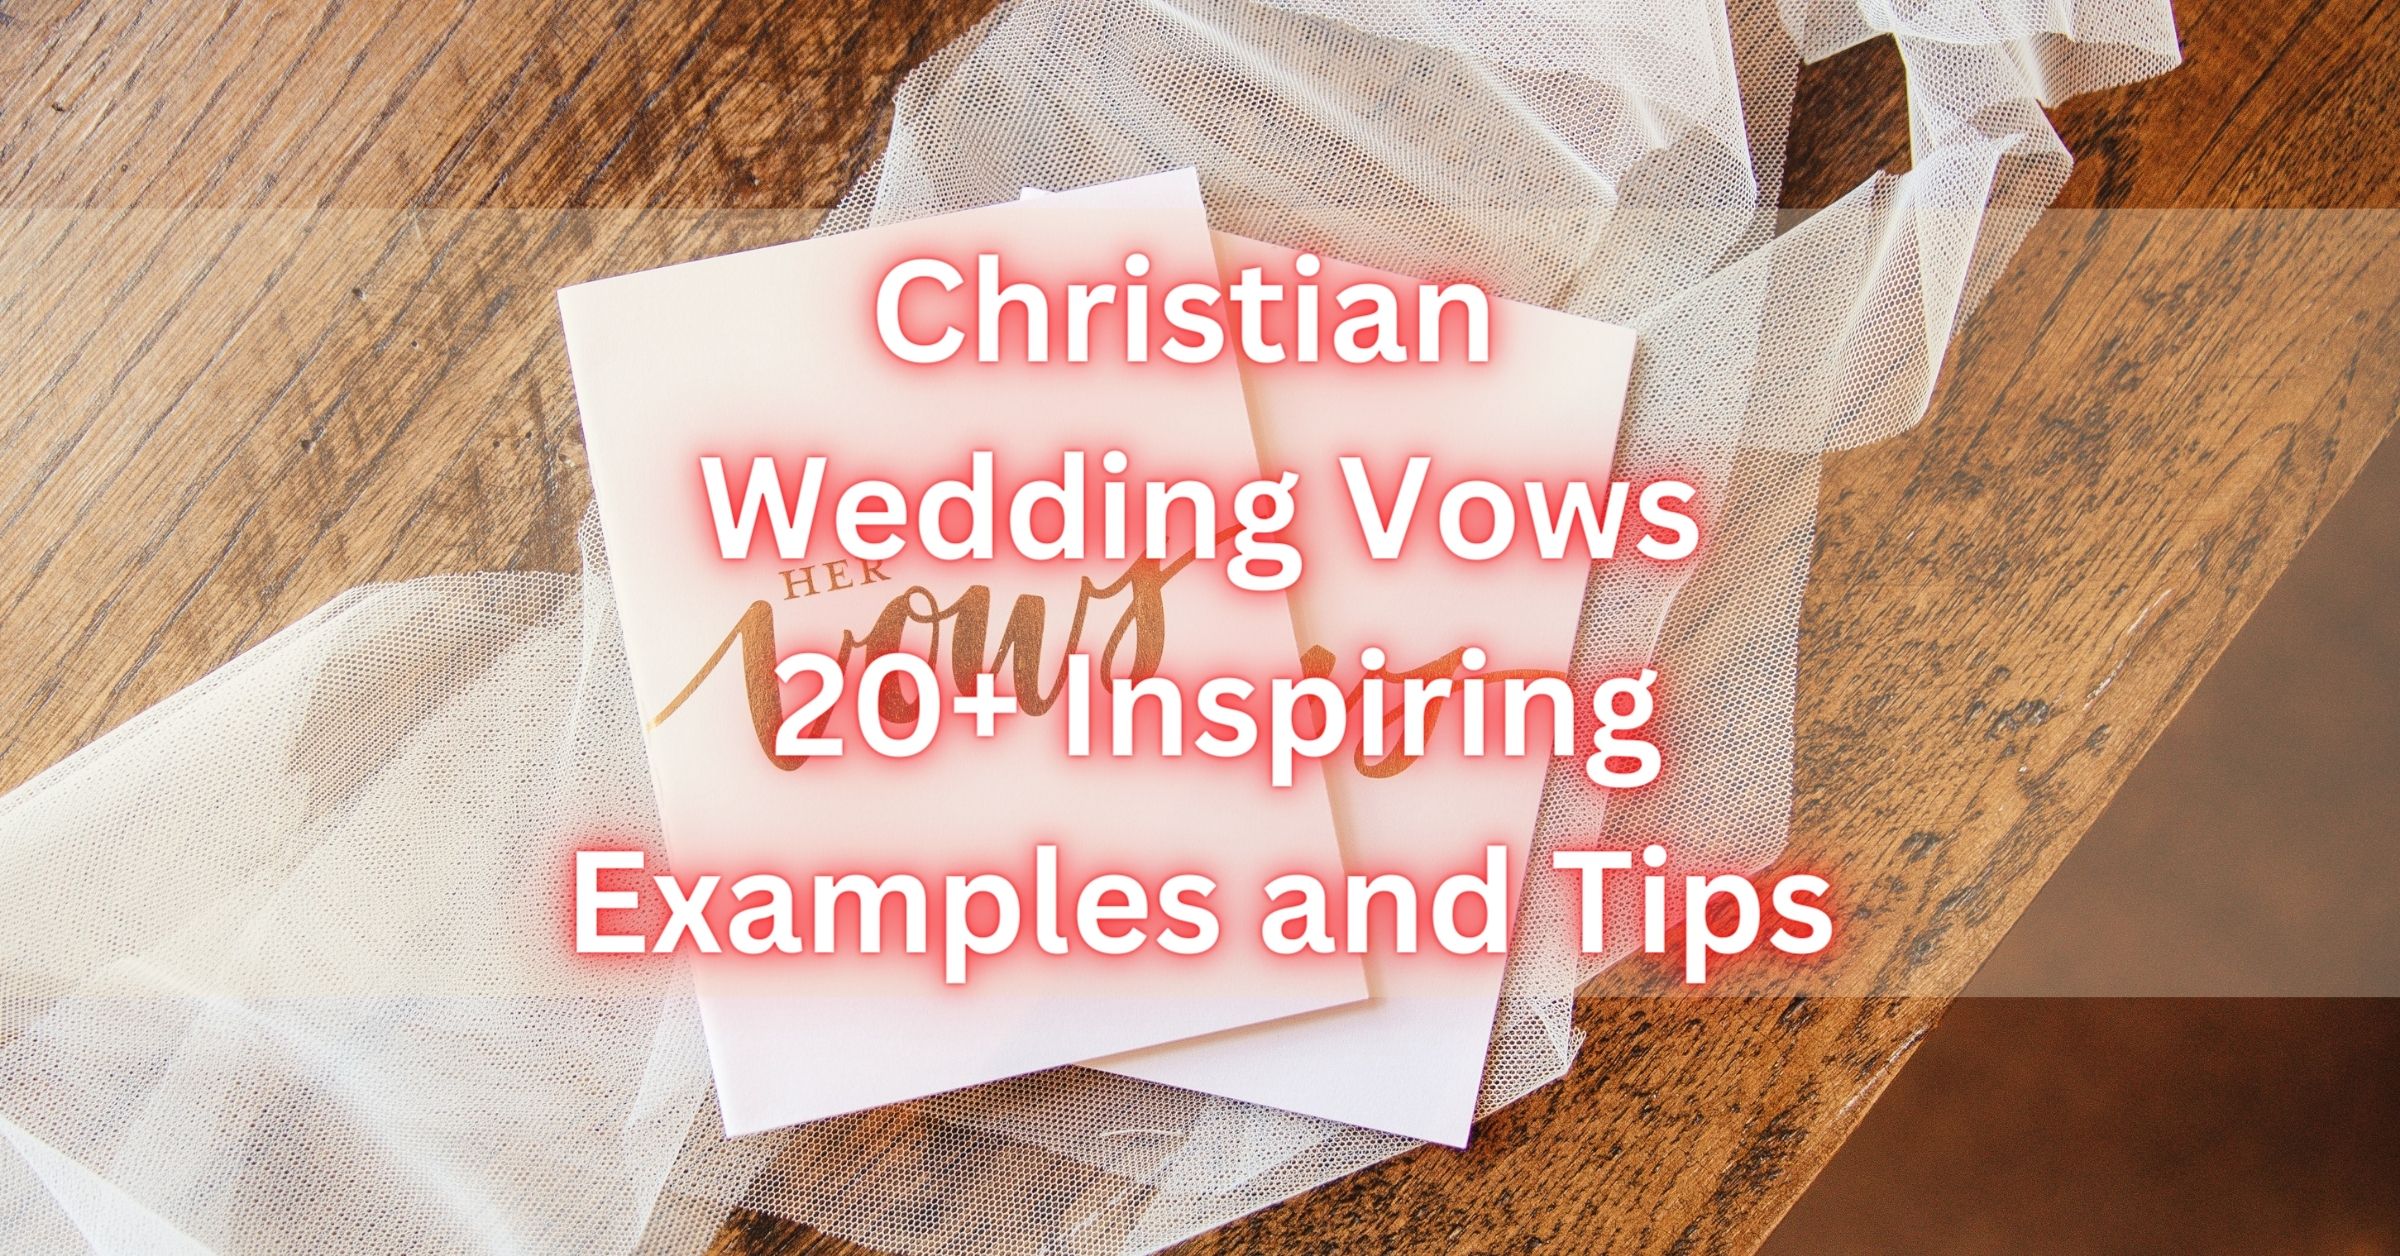 Christian Wedding Vows 20+ Inspiring Examples And Tips